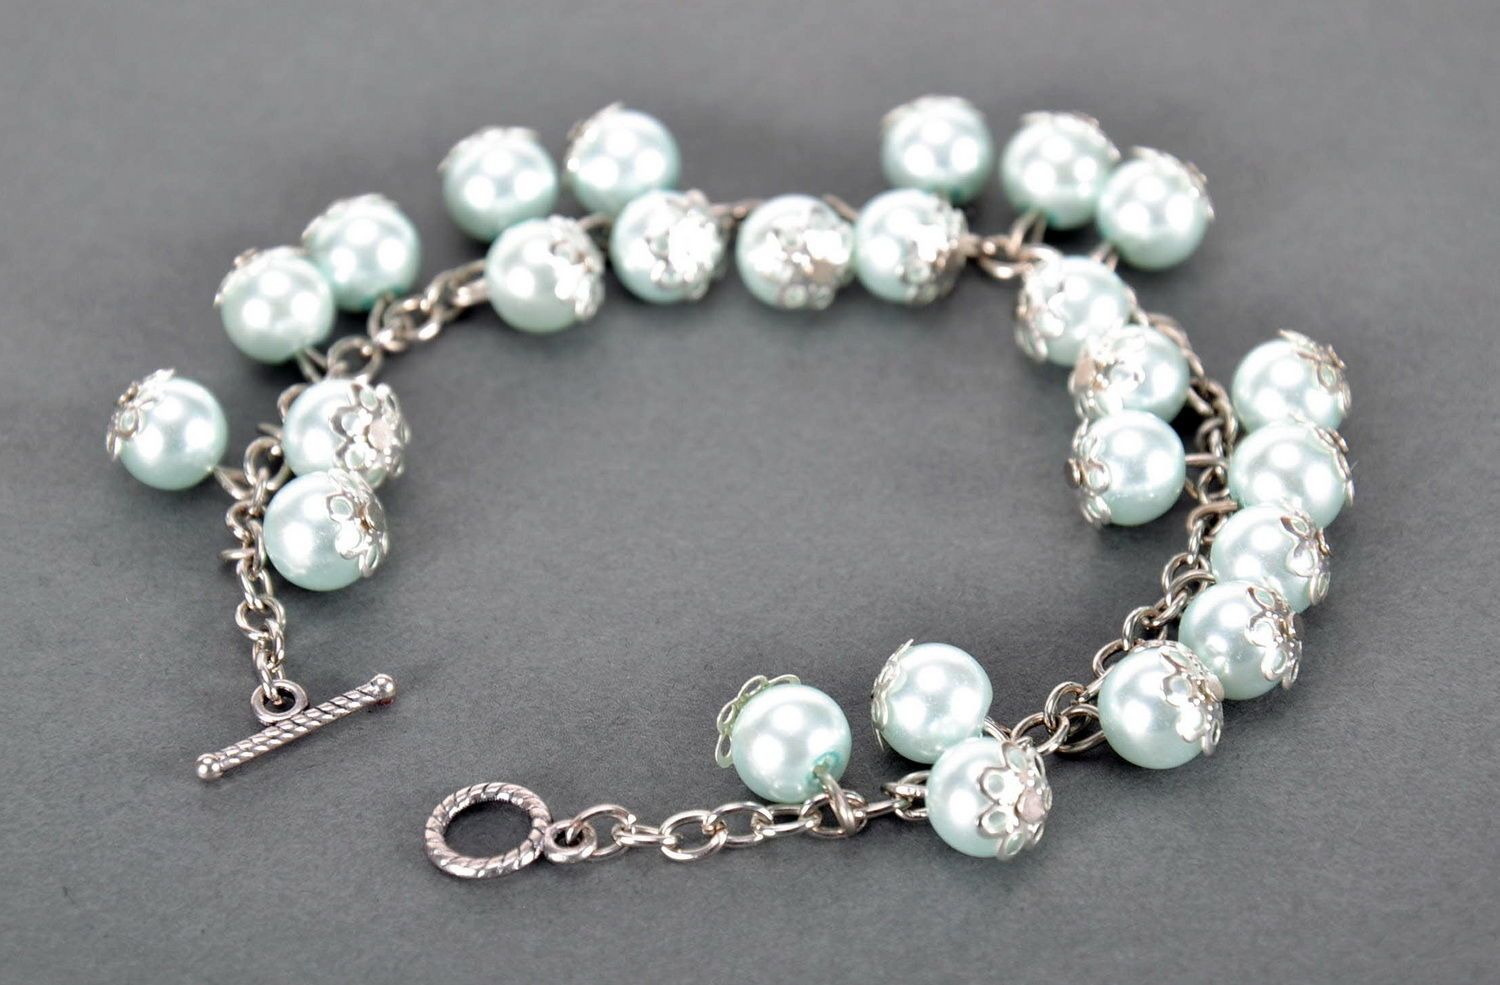 Bracelet made from ceramic pearls photo 4